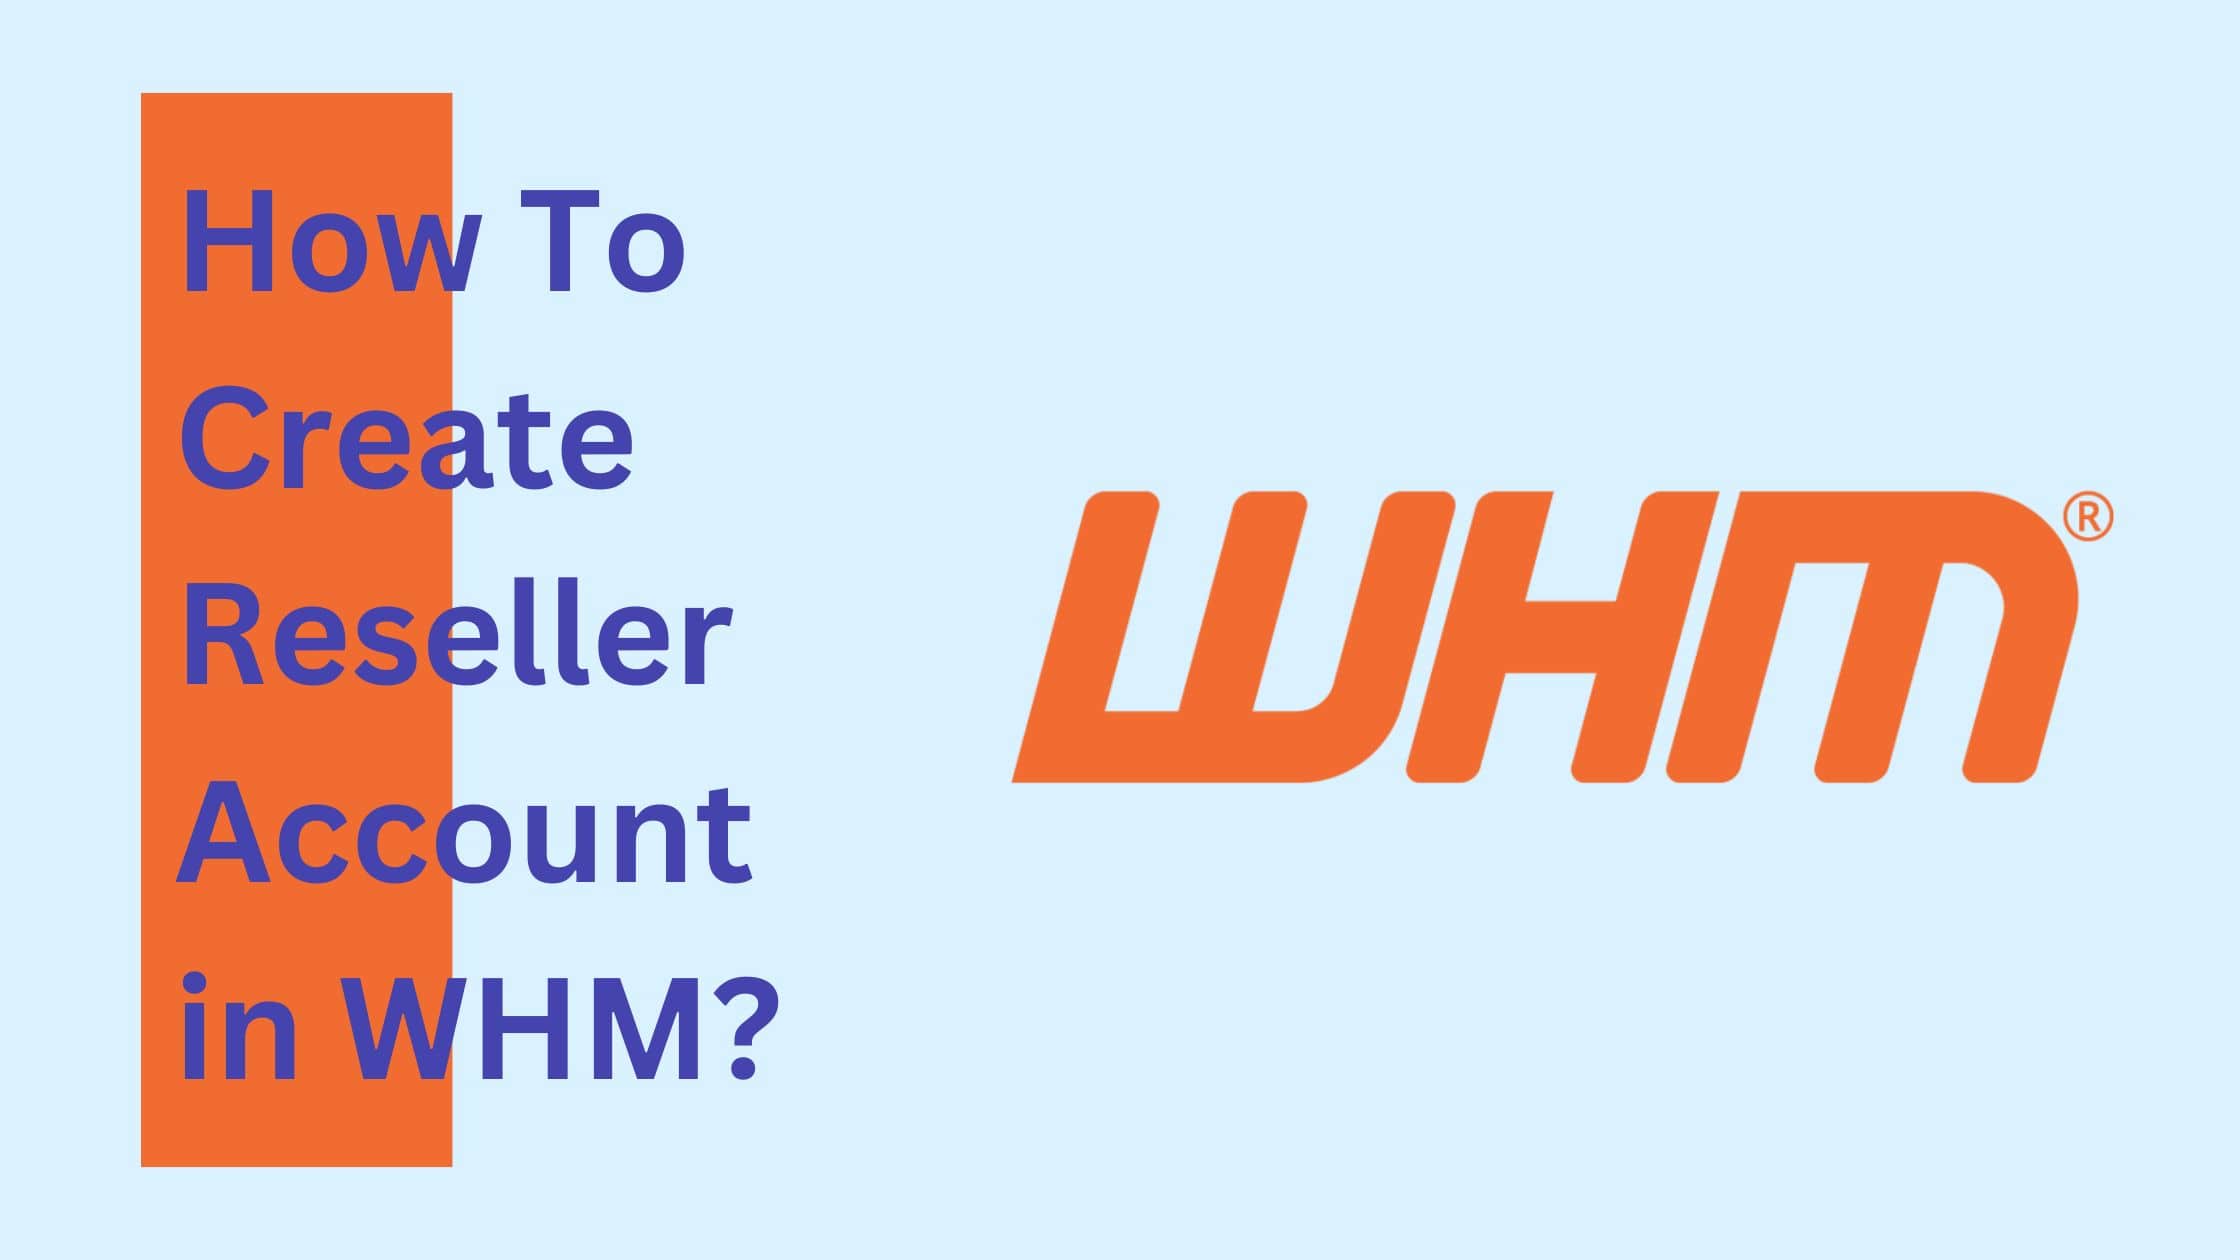 How To Create Reseller Account In WHM?